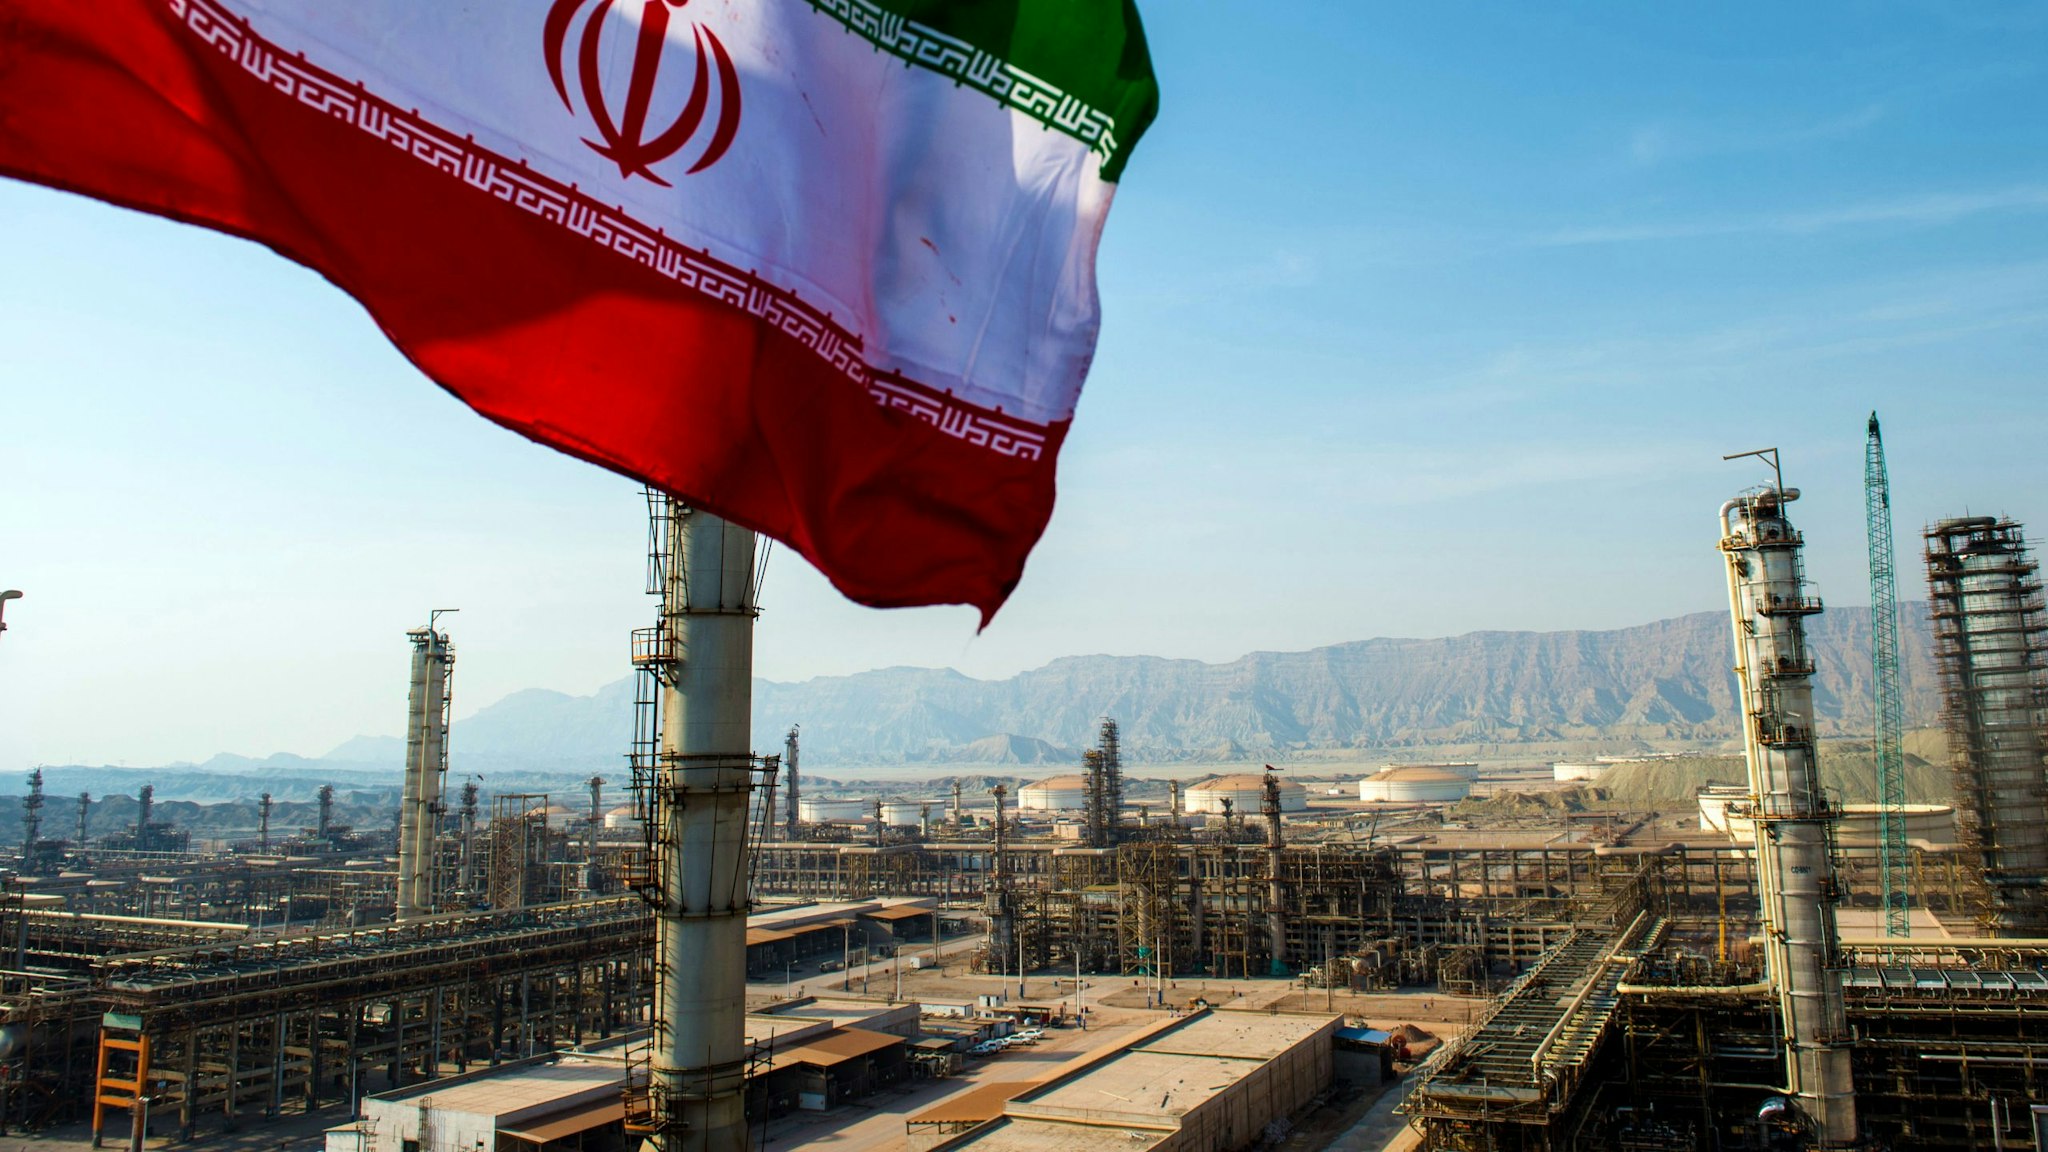 An Iranian national flag flies above the new Phase 3 facility at the Persian Gulf Star Co. (PGSPC) gas condensate refinery in Bandar Abbas, Iran, on Wednesday, Jan. 9. 2019. The third phase of the refinery begins operations next week and will add 12-15 million liters a day of gasoline output capacity to the plant, Deputy Oil Minister Alireza Sadeghabadi told reporters.